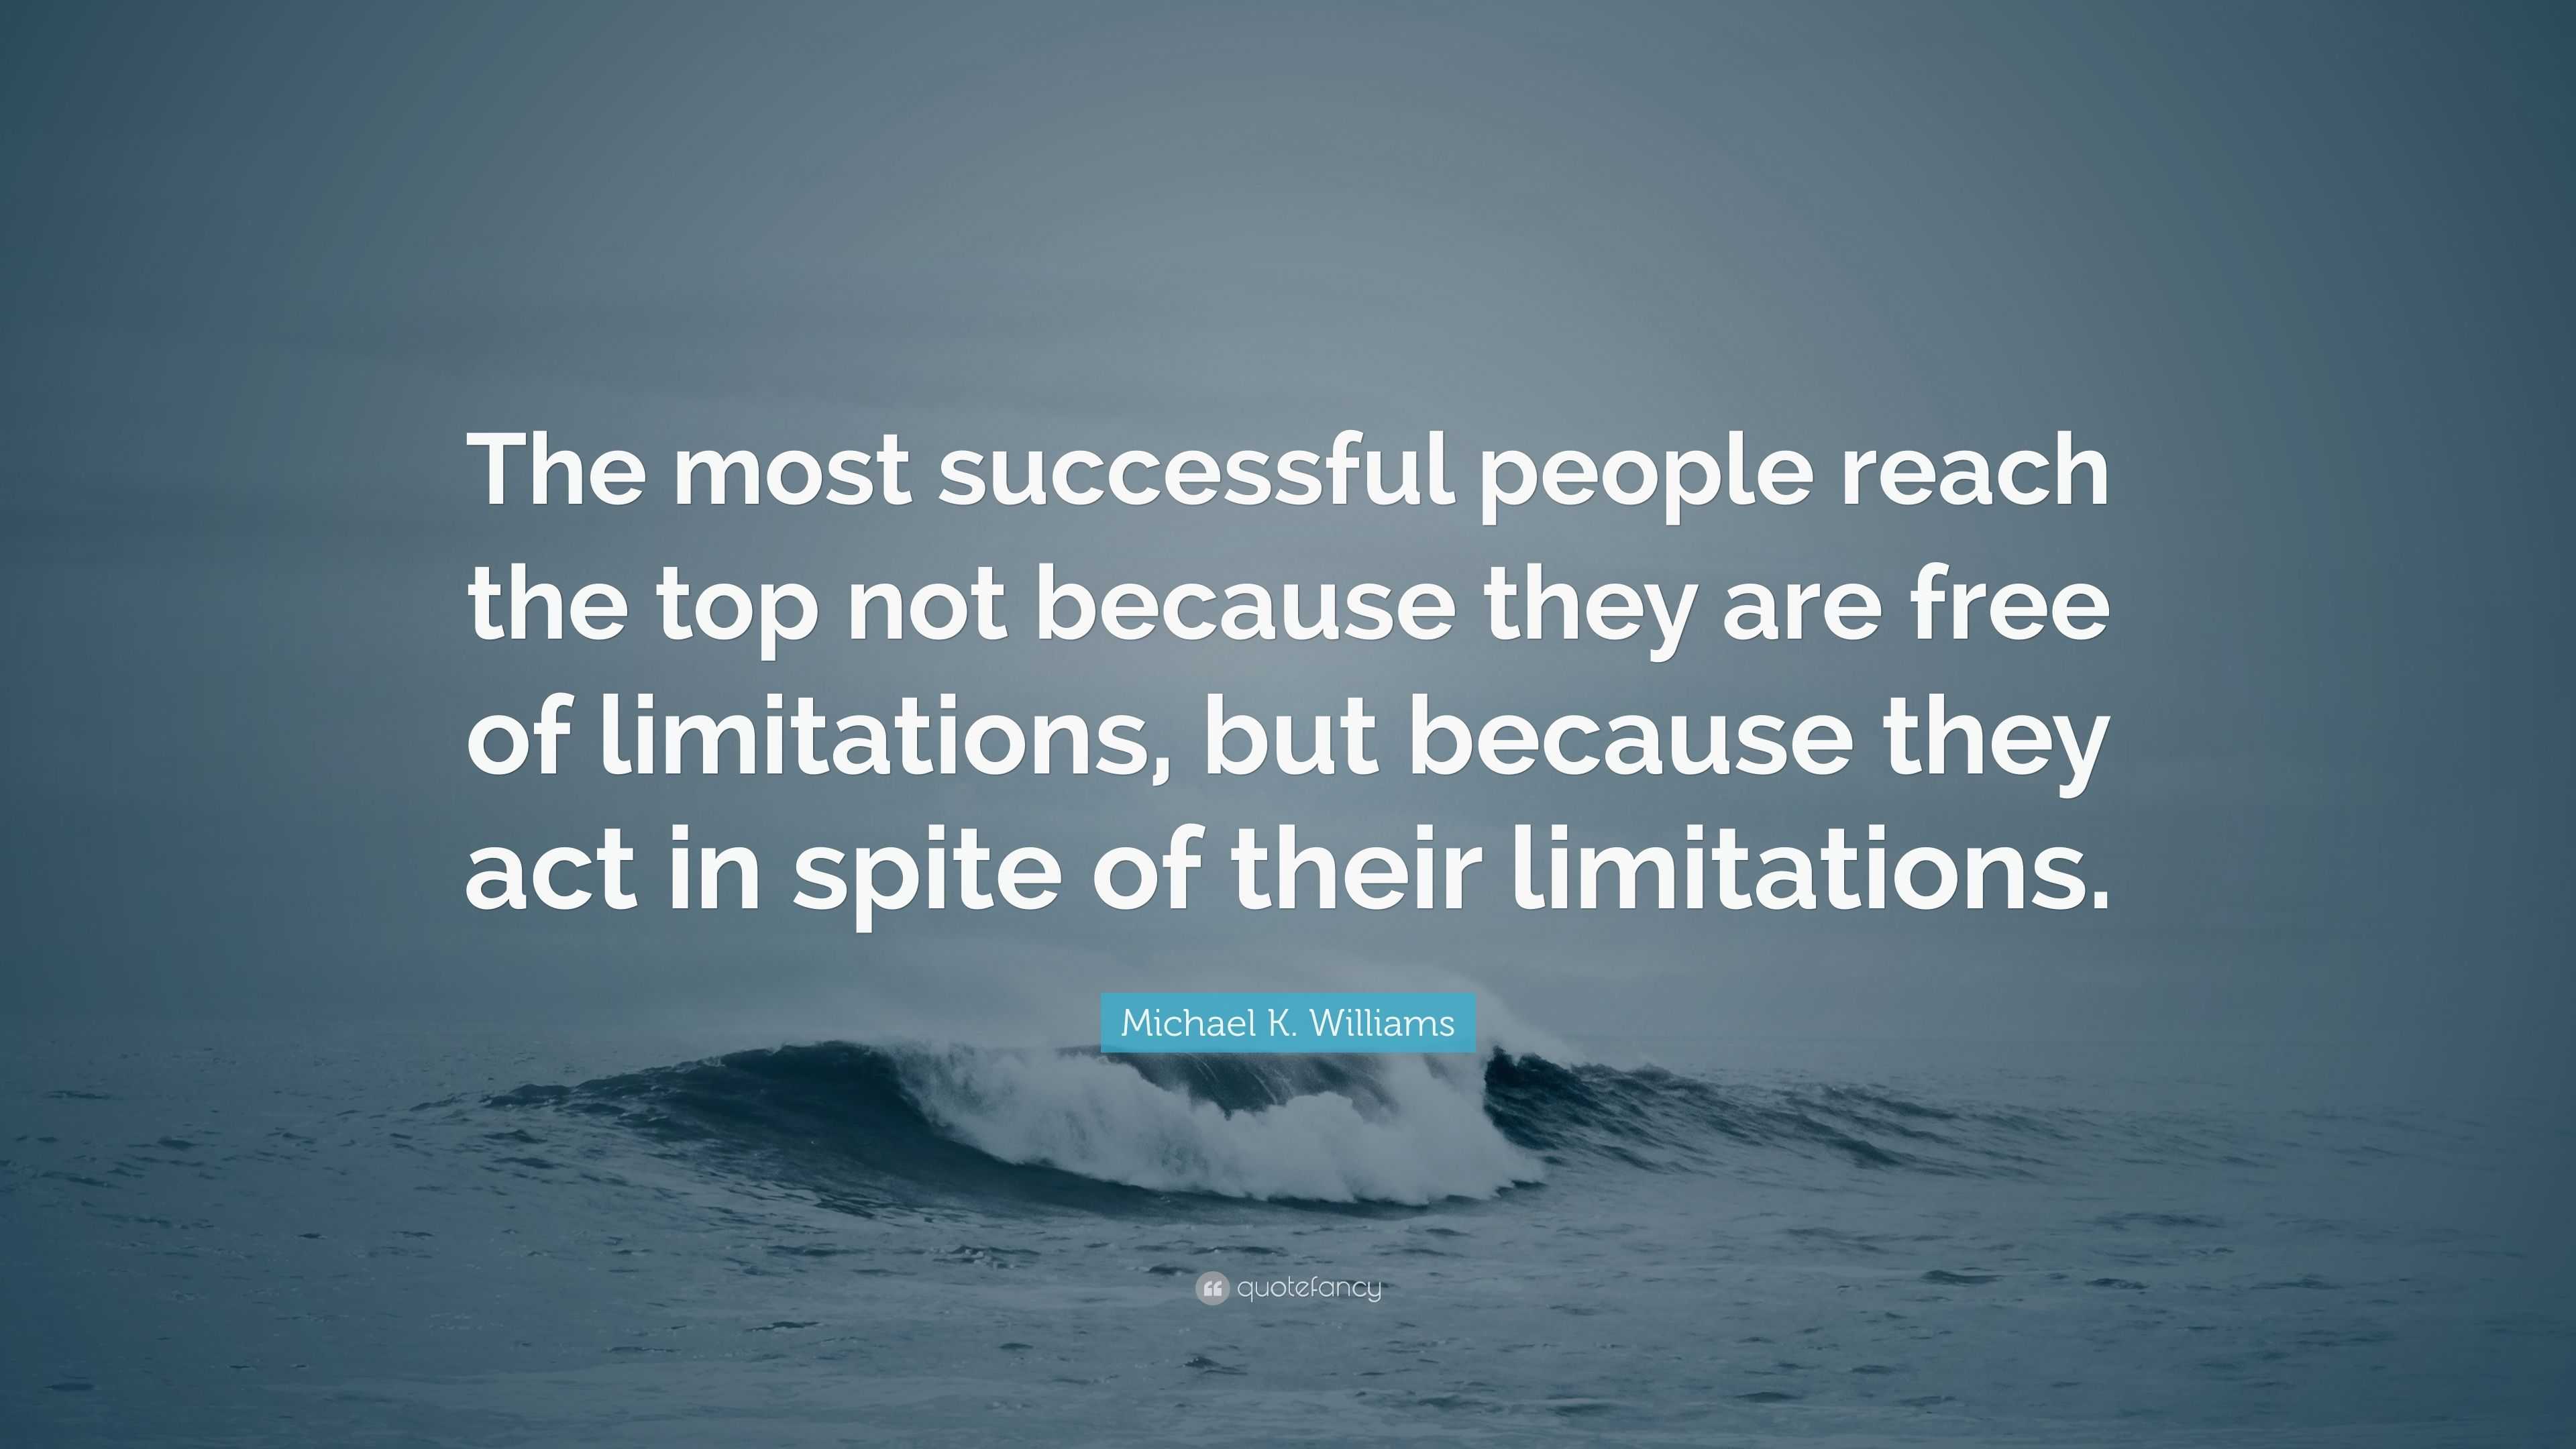 Michael K. Williams Quote: “The most successful people reach the top not  because they are free of limitations, but because they act in spite of  thei...”